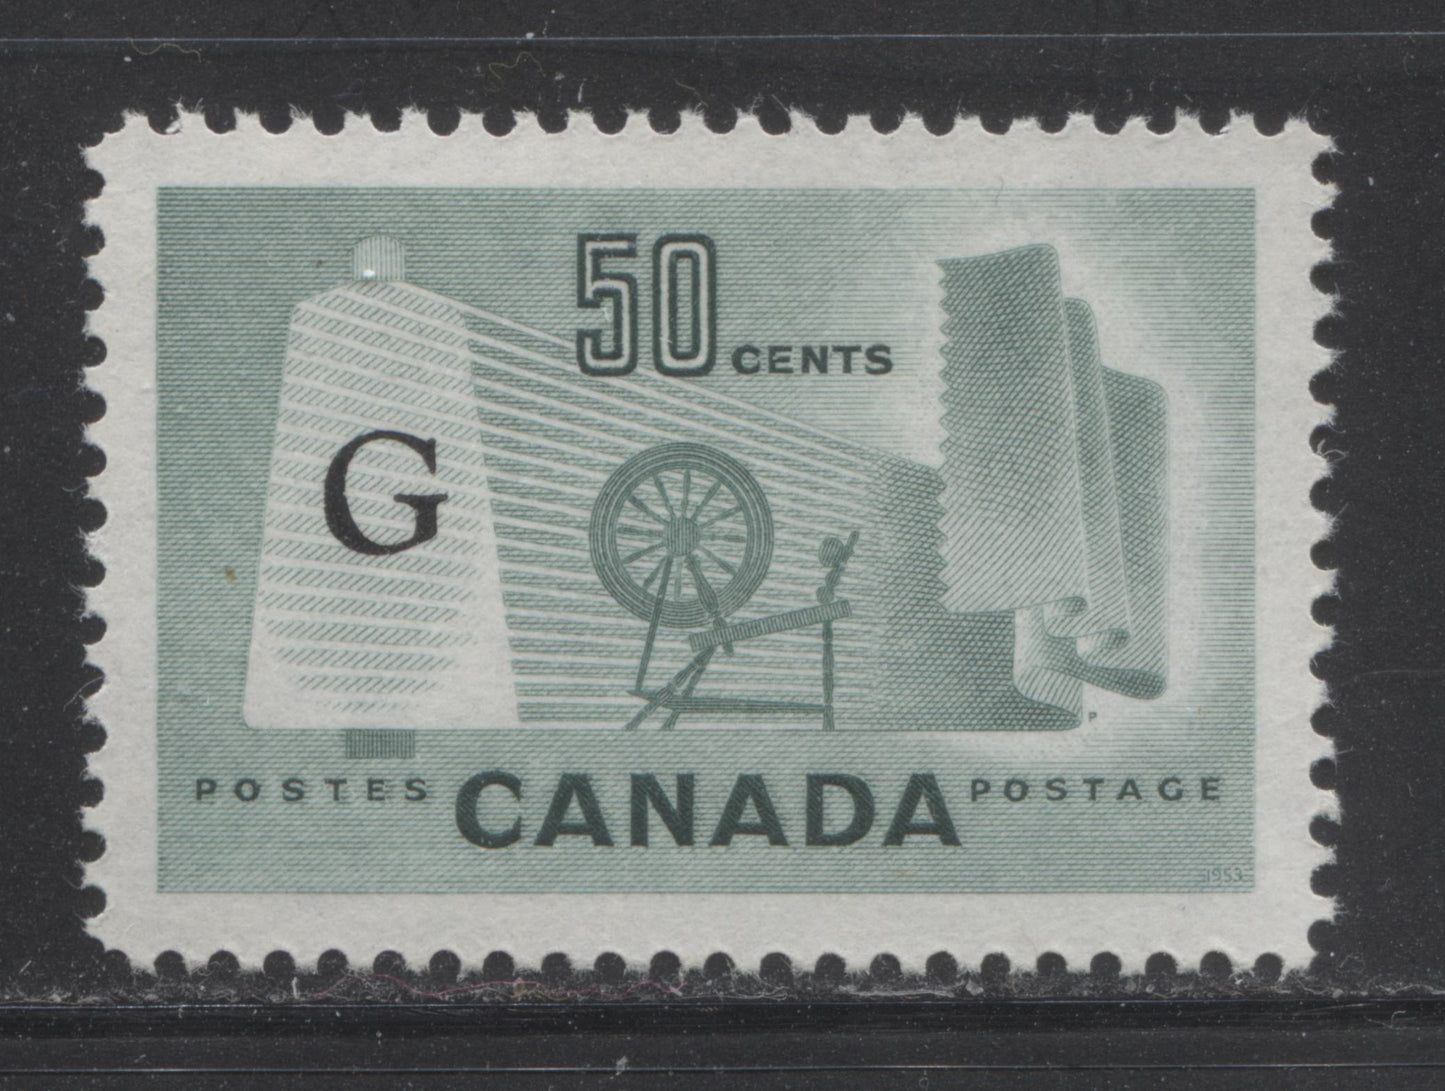 Canada #O38a 50c Pale Milky Green, Textile Industry, 1953-1954 Karsh Official G Overprinted Issue, A Single of the Flying G Overprint Showing Retouch in Lower Left Corner, Perf. 11.9, DF Smooth Paper, Smooth Cream Gum With a Semi-Gloss Sheen, VFNH Brixton Chrome 